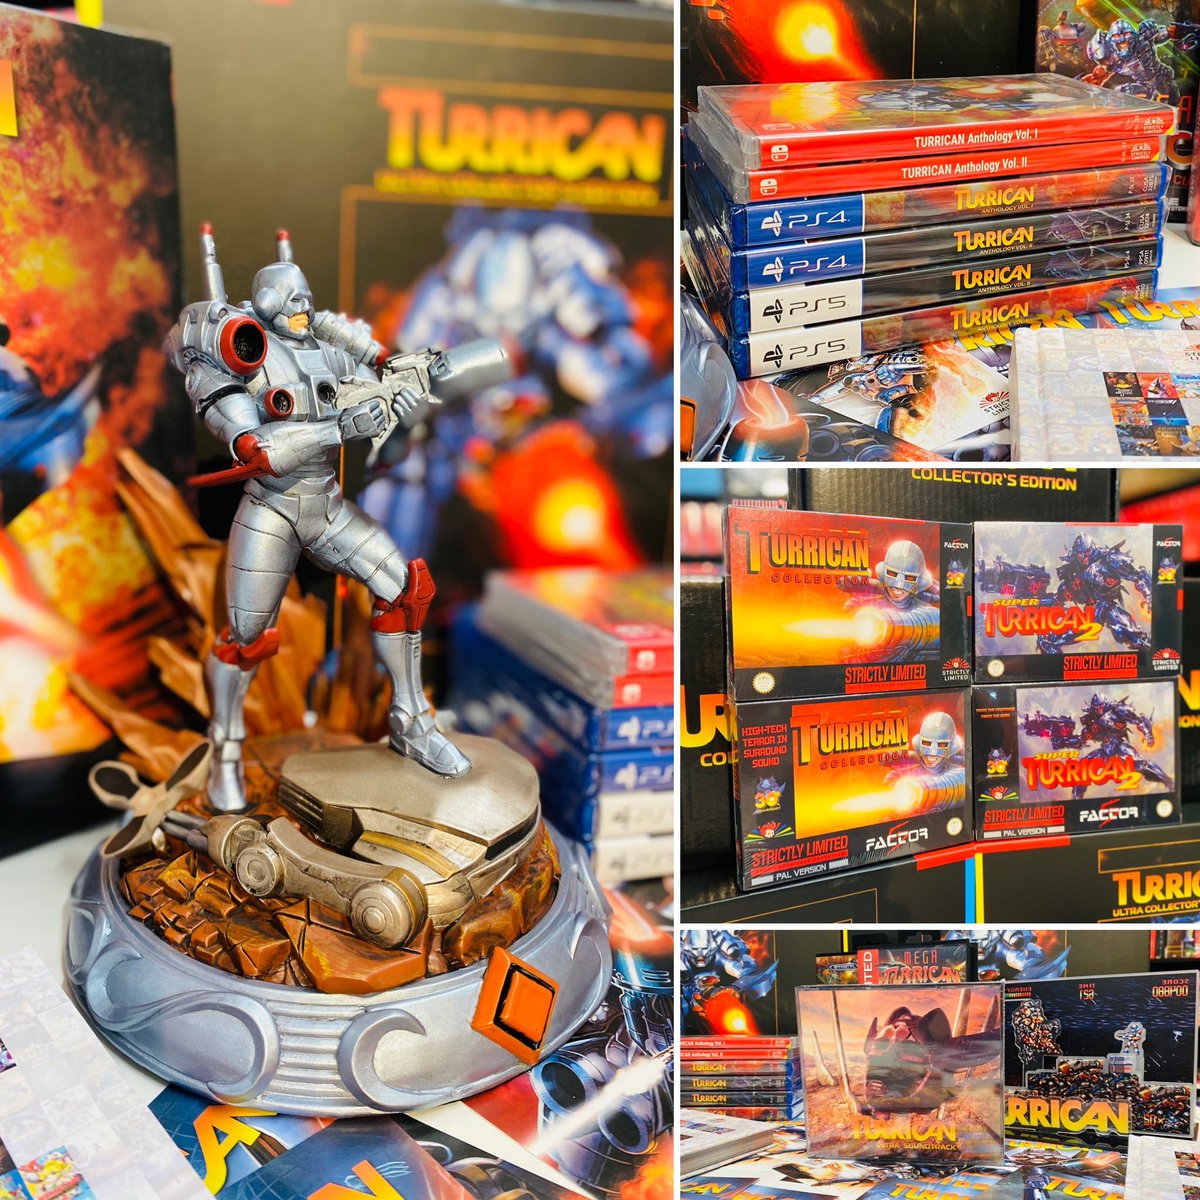 Back from vaca 🇫🇷 and had no time to unpack all the new goods that came in yet,
So… let’s just start with this banger 😋

#Gamemuseum #videogames #gamecollecting #gameroom #raregames #limitedgames #preorders #turrican #retrogaming #nes #snes #megadrive #collectorsedition